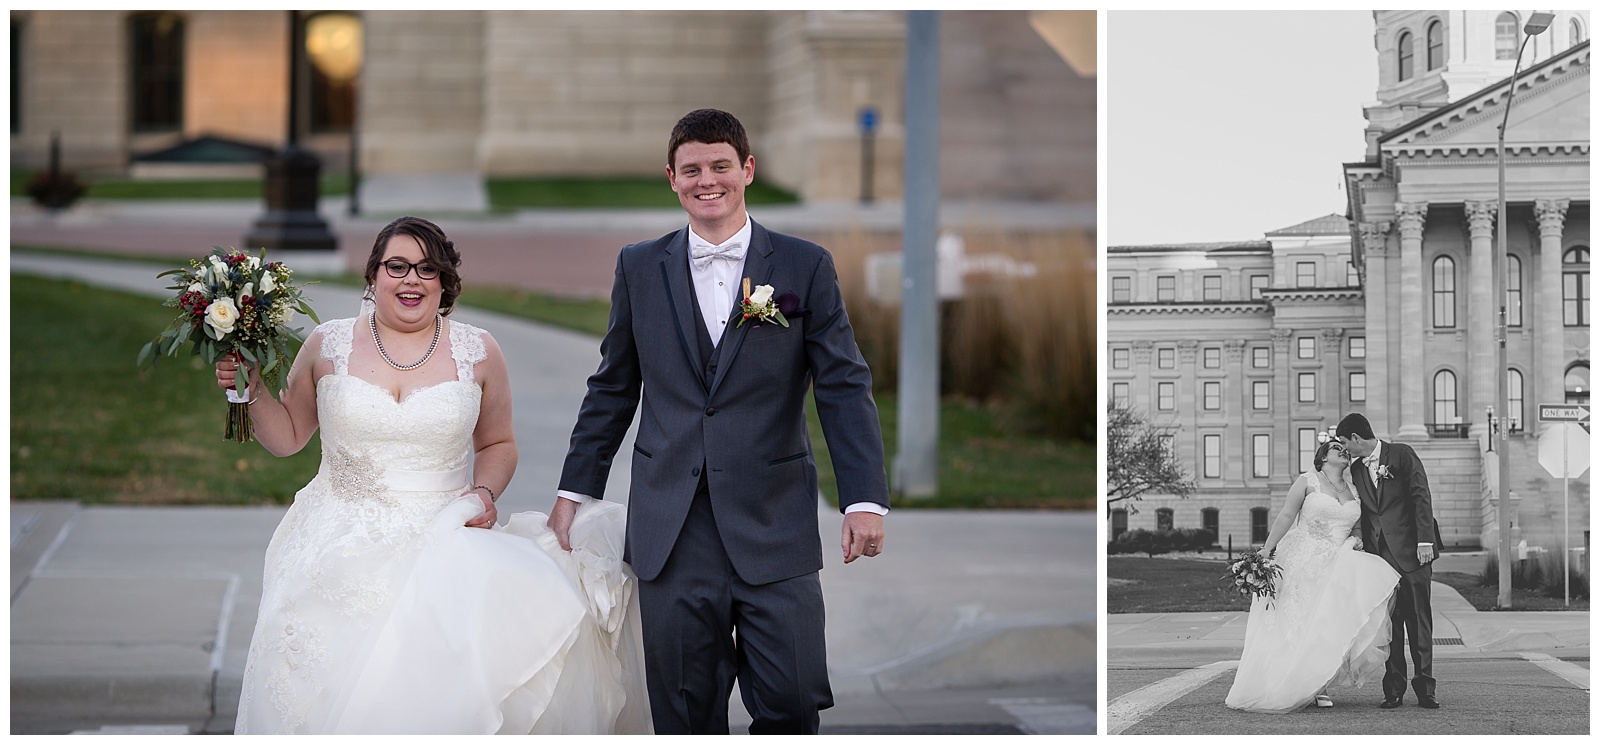 Wedding photography at the Capitol Building in Topeka, Kansas.